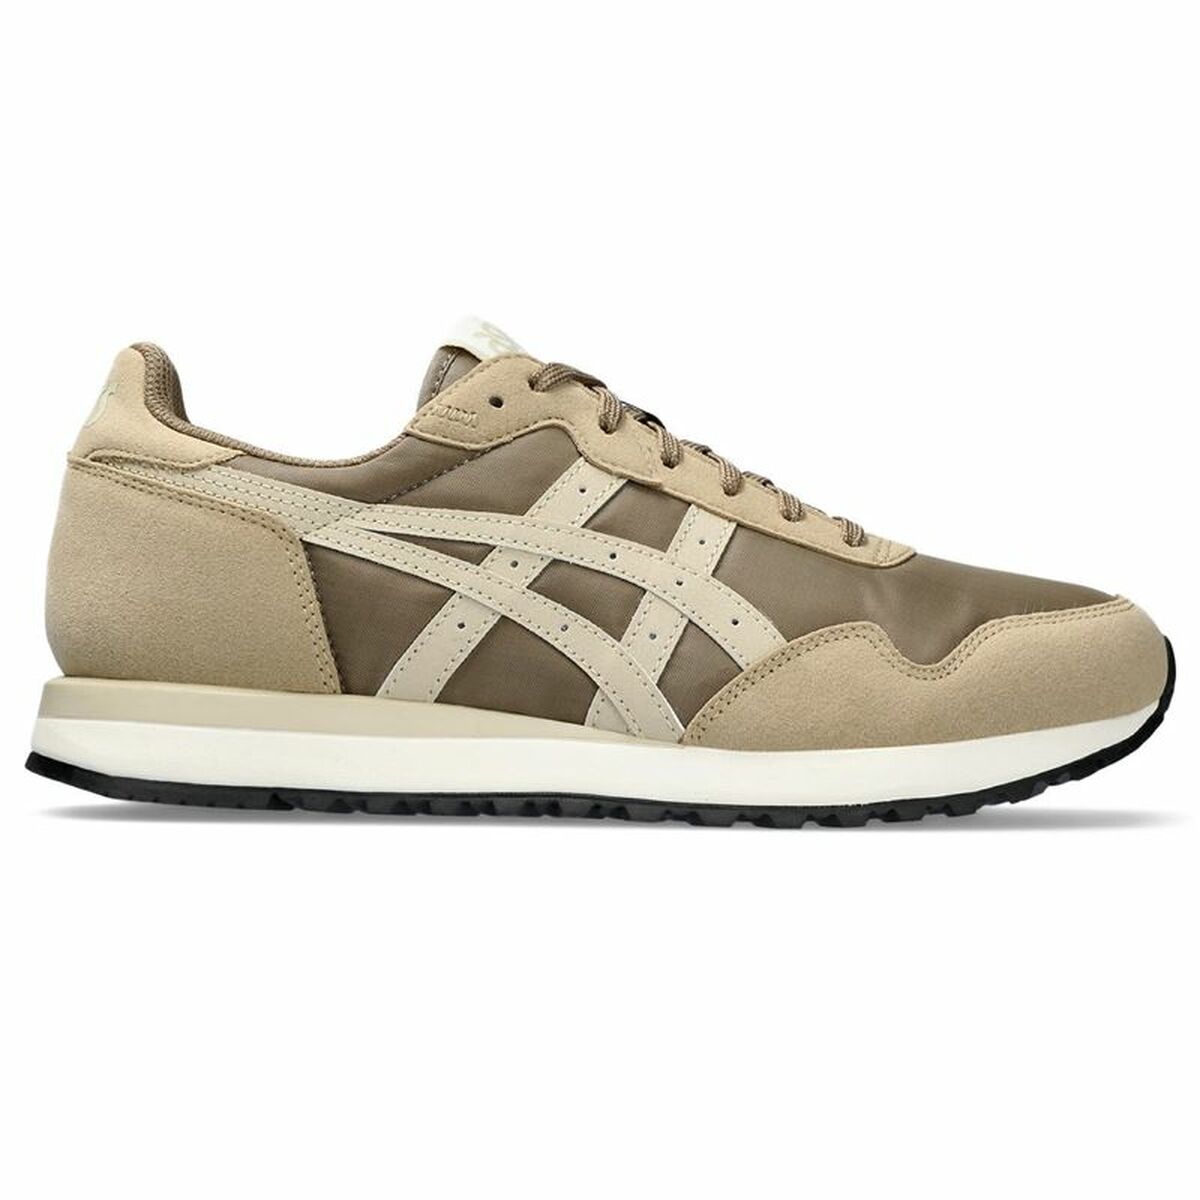 Chaussures casual homme Asics Tiger Runner II Marron